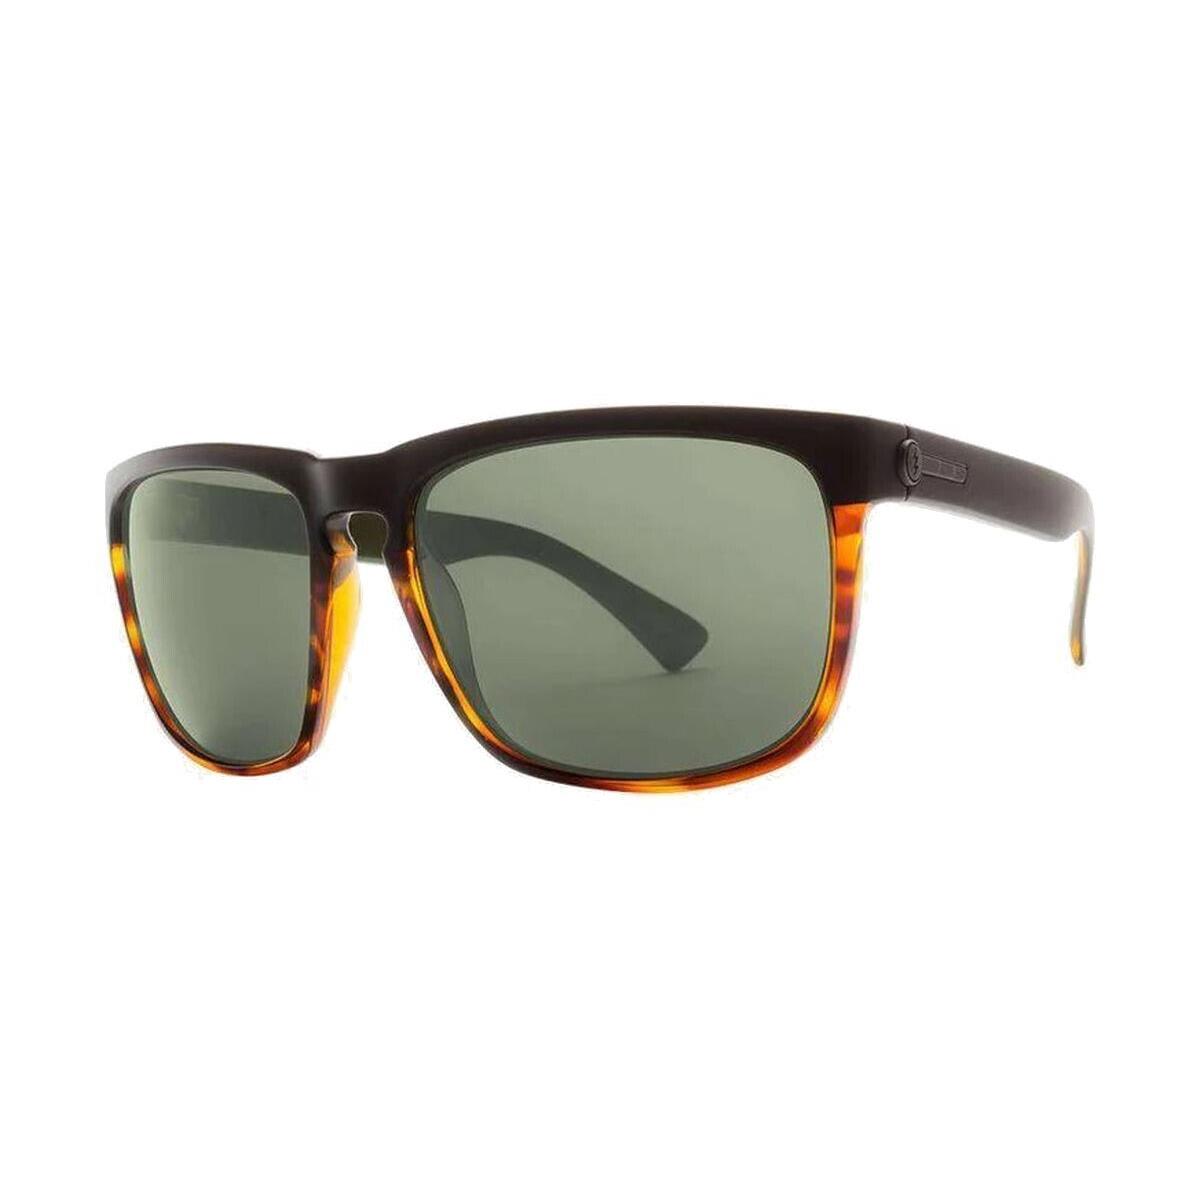 Electric Knoxville XL Sunglasses Darkside Tortoise with Grey Polarized Lens